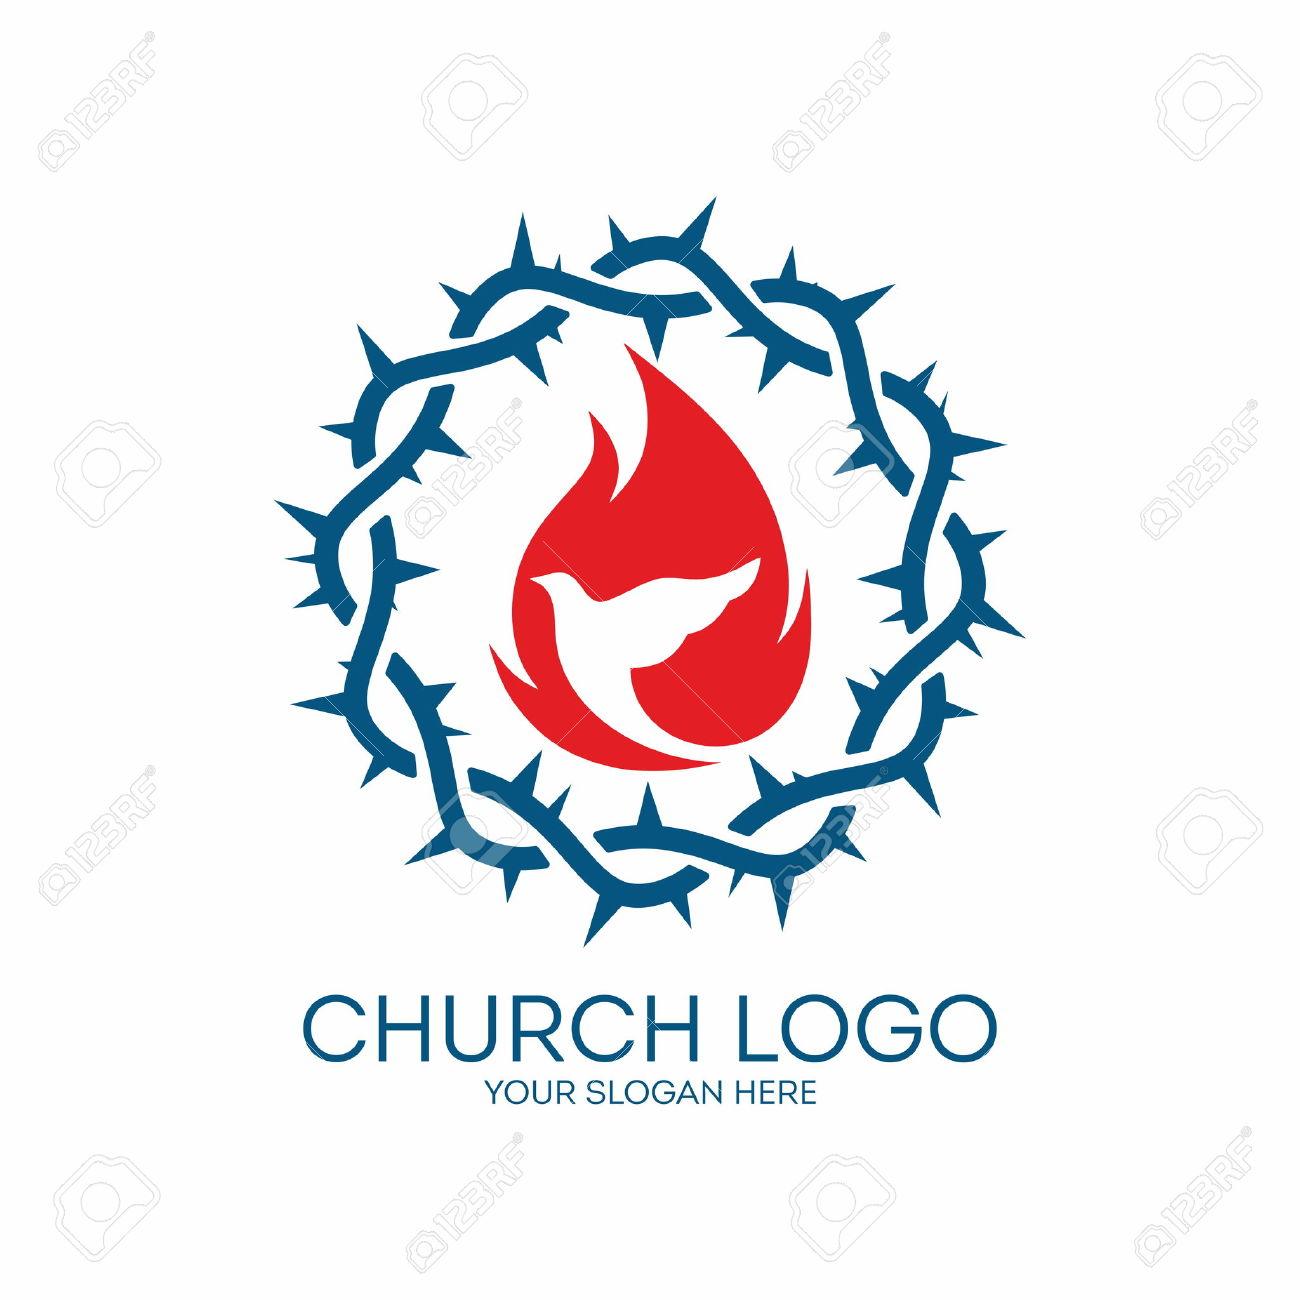 Red and Grey Church Logo - 46668933-Church-logo-Crown-of-thorns-blue-red-dove-flames-icon-Stock ...